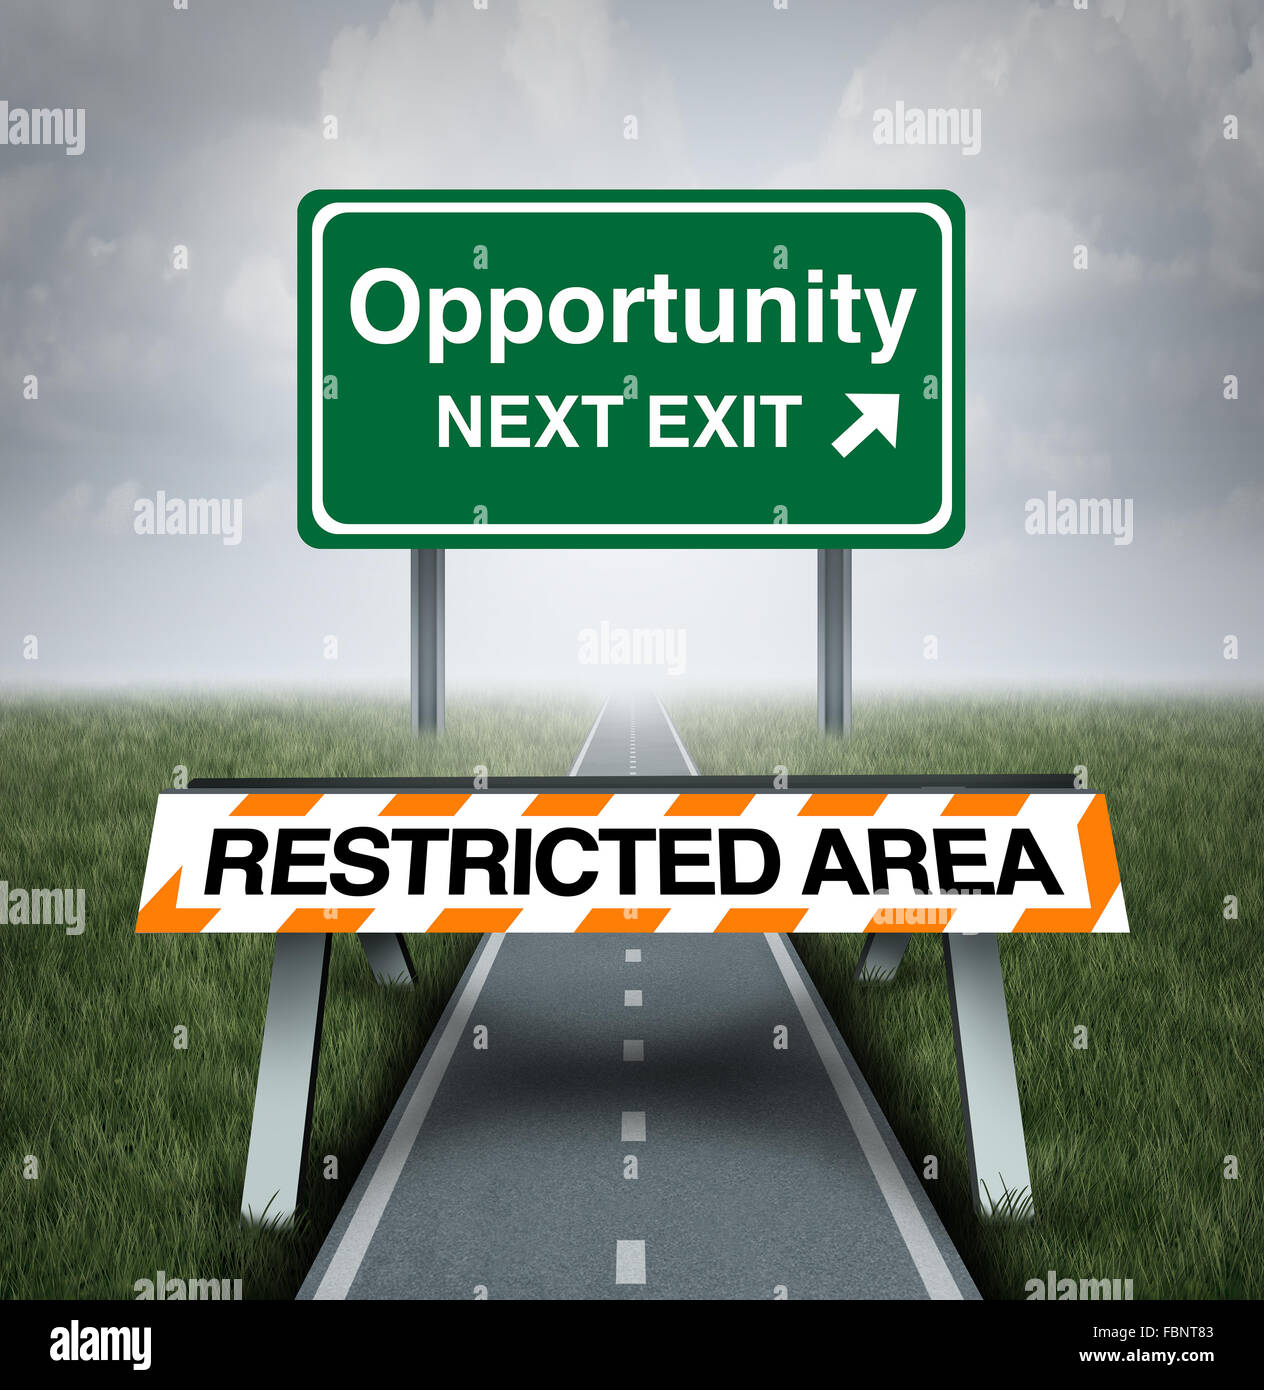 Restricted opportunity concept and business road block symbol as a barrier with text barring entrance to a road with a sign for Stock Photo